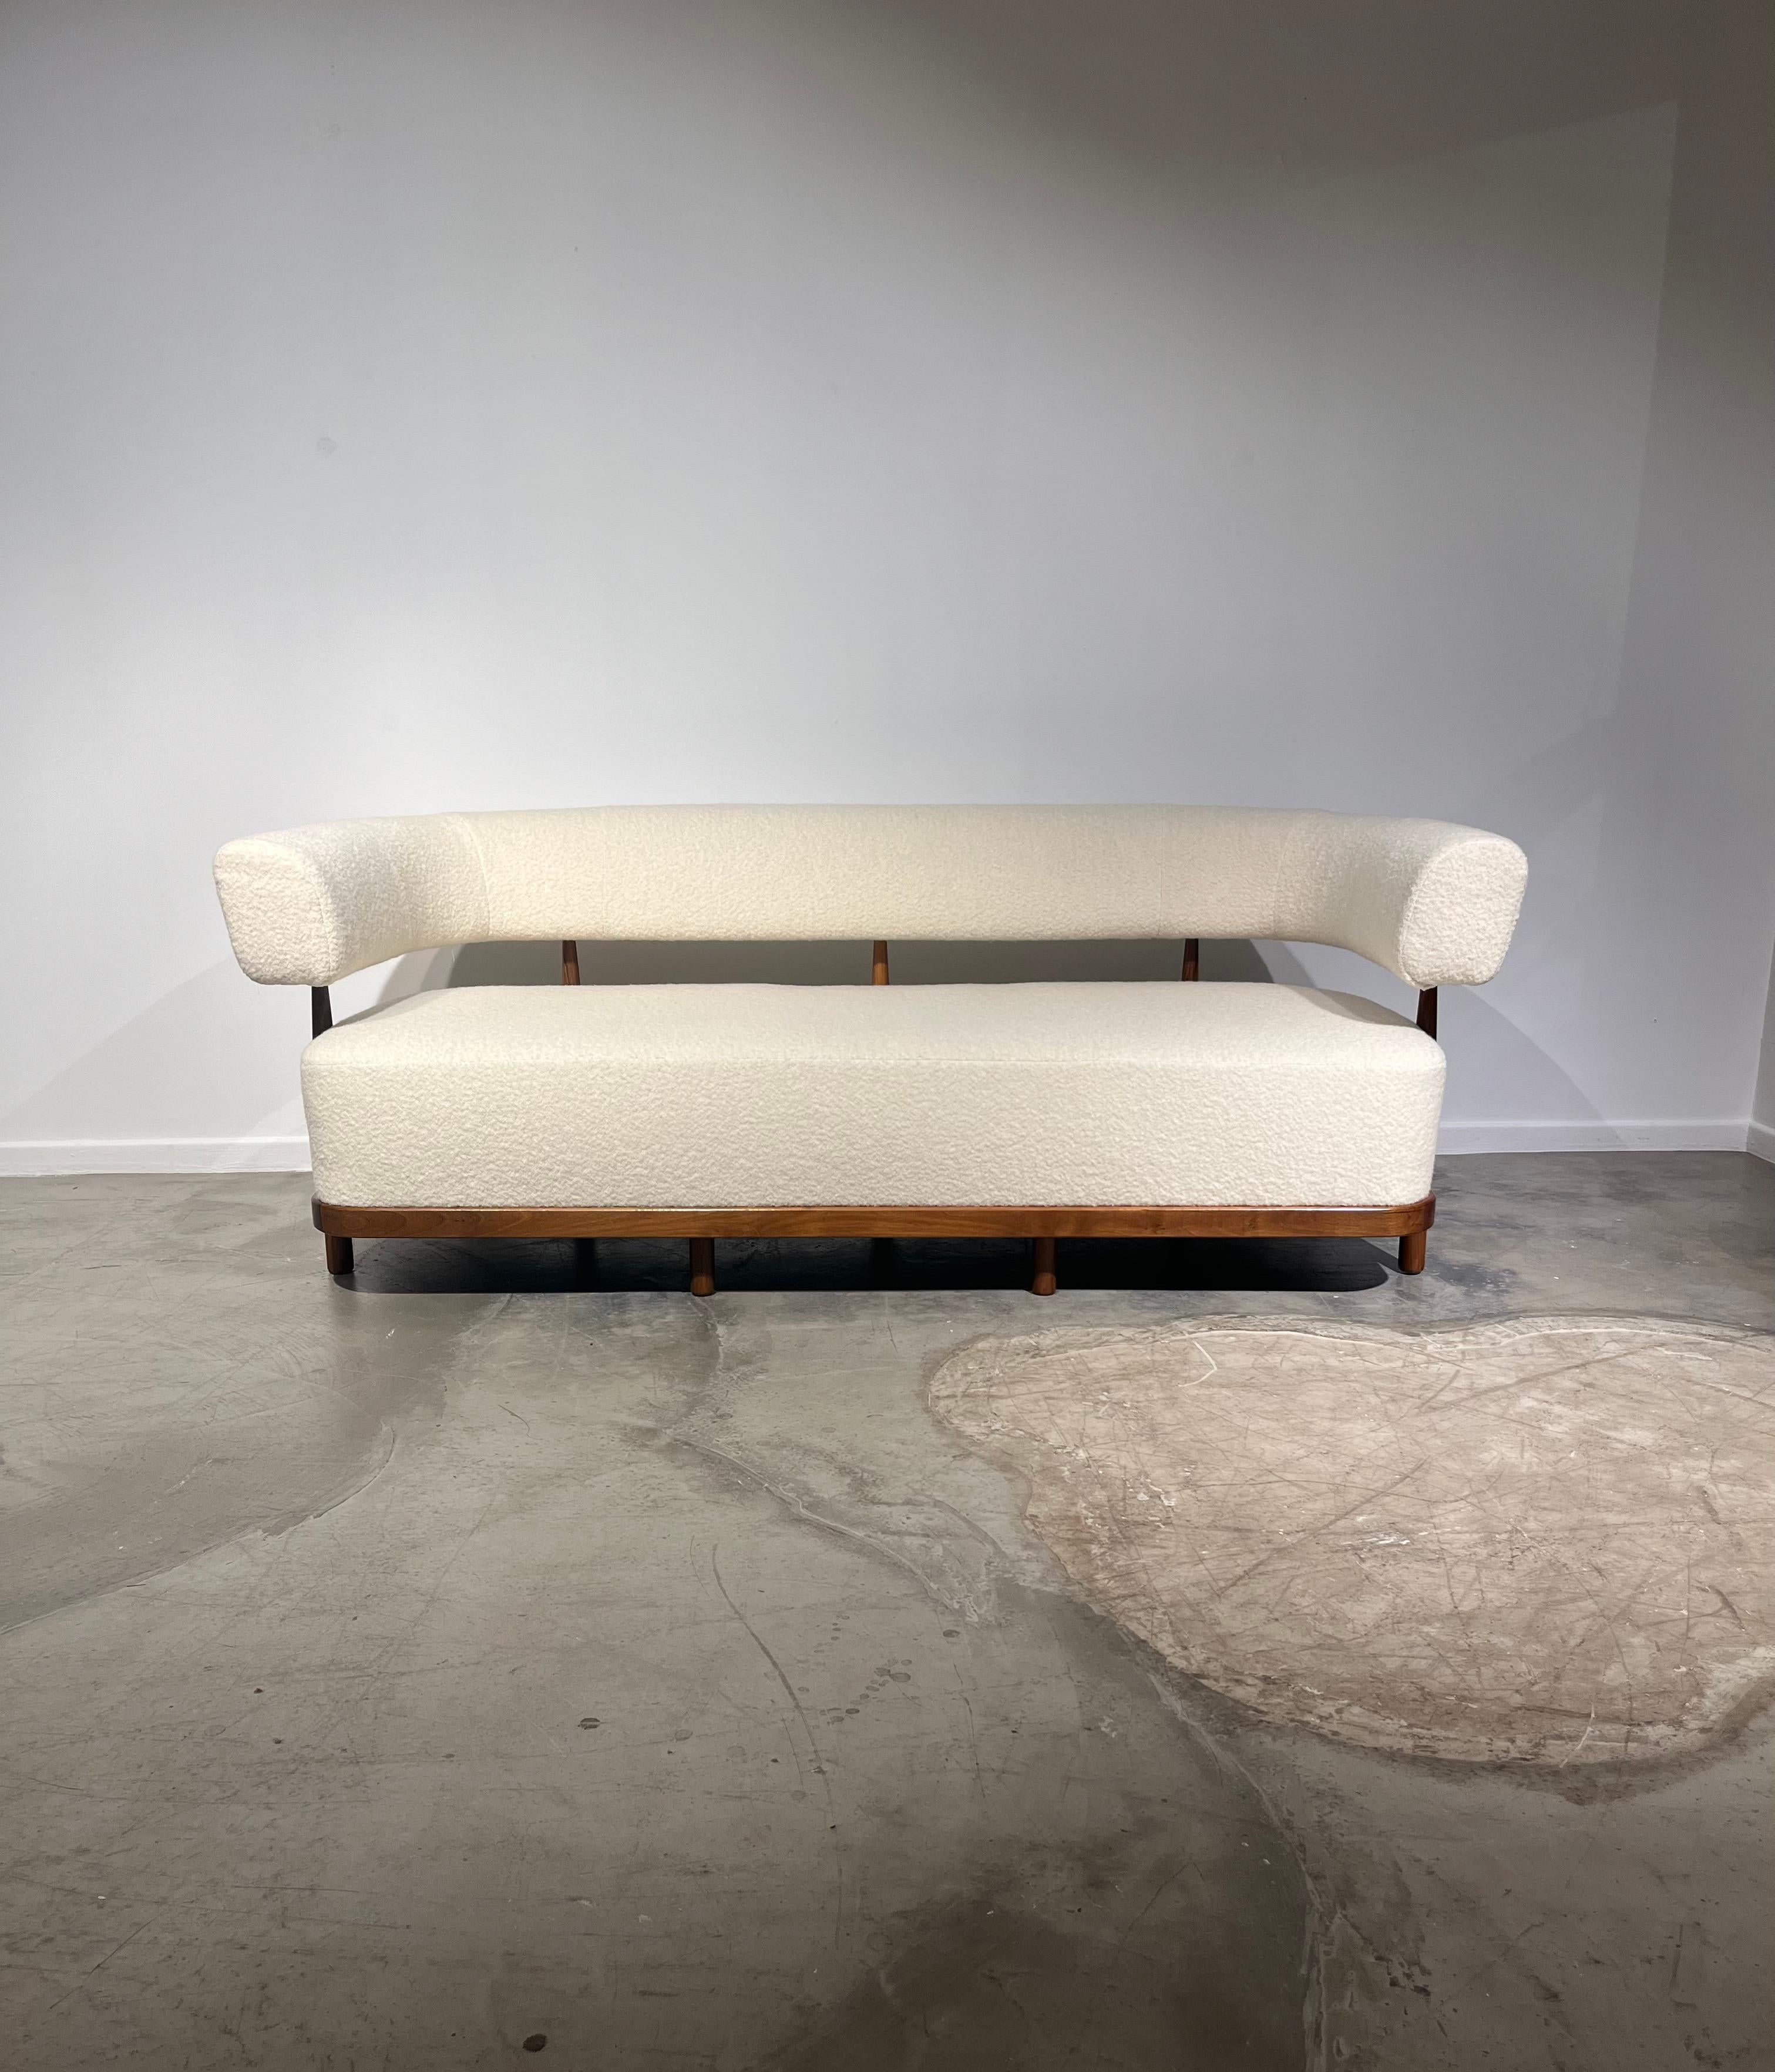 Interesting 3 seats sofa with wood structure and white bouclette fabric.